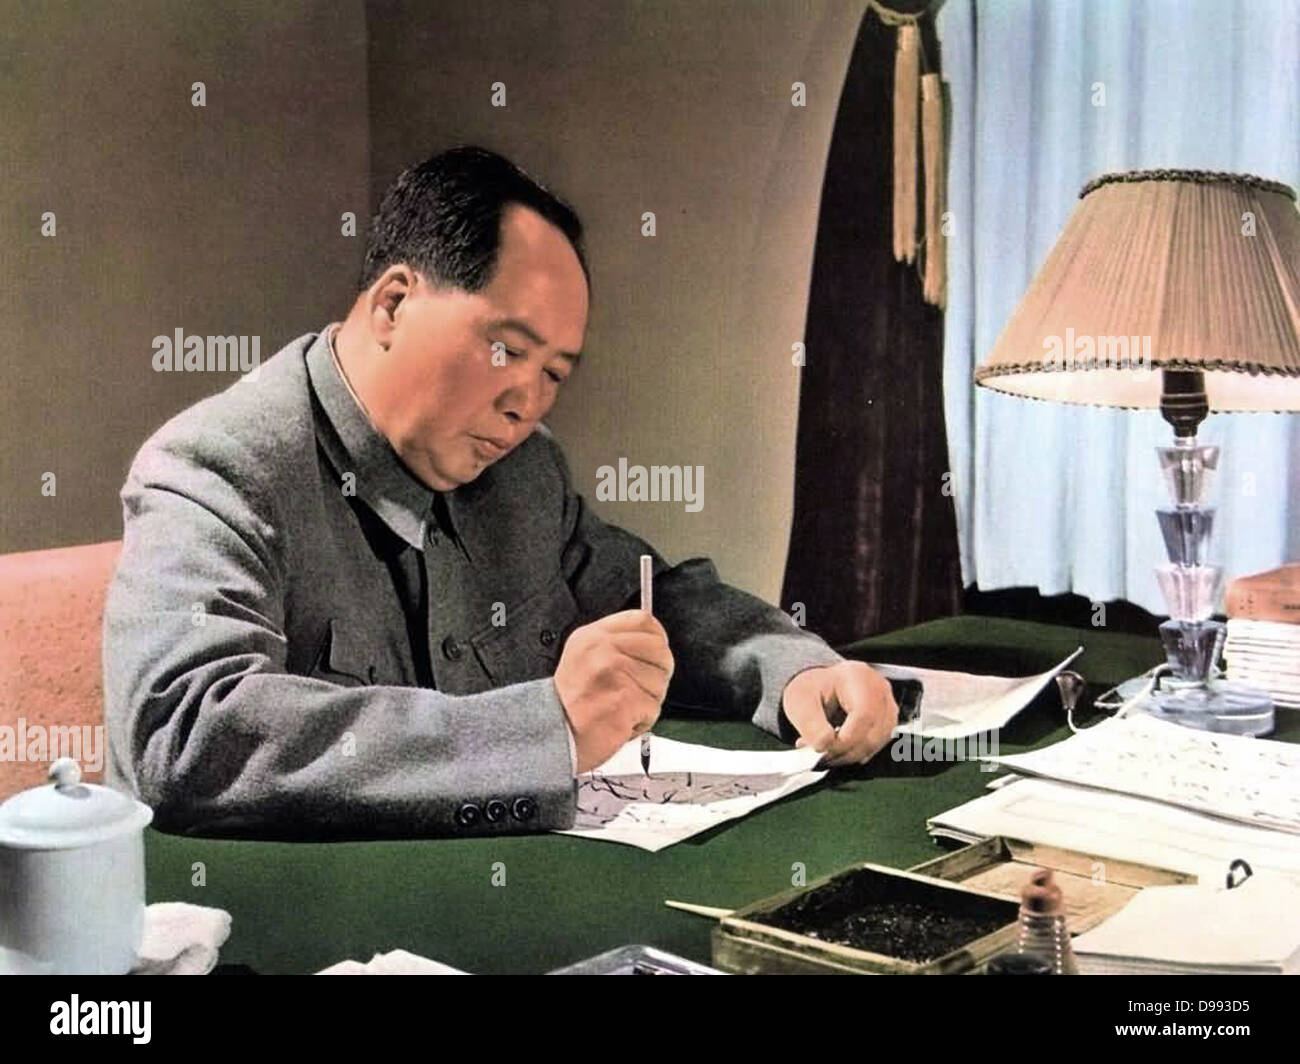 Mao Tse-Tung (1893-1976) Mao Zedong, leader communiste chinois Banque D'Images